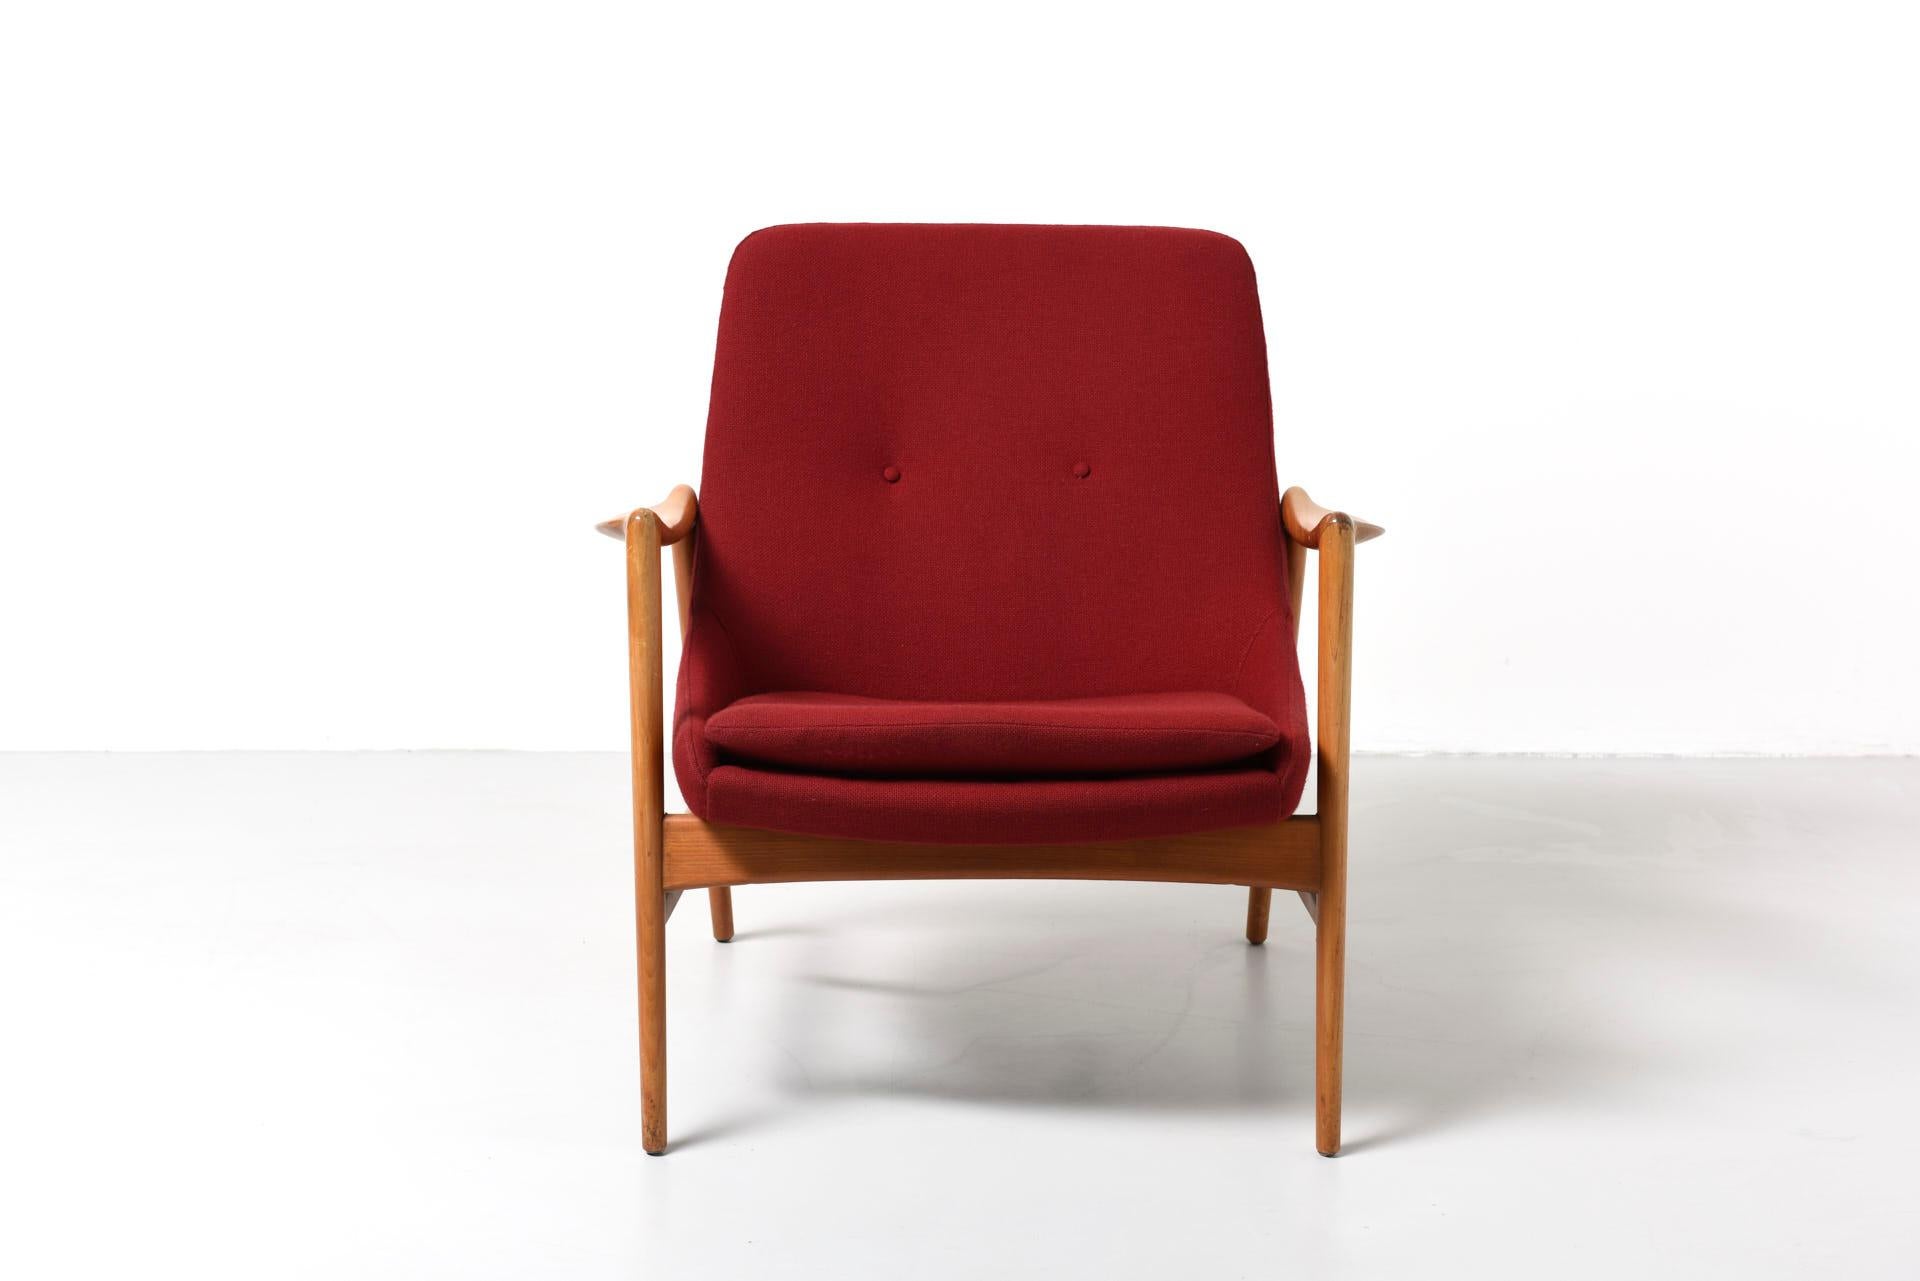 Rare easy chair designed by Rastad & Relling design office in 1957 and produced at Dokka Møbler, Norway.
Frame in beech with deep red fabric.